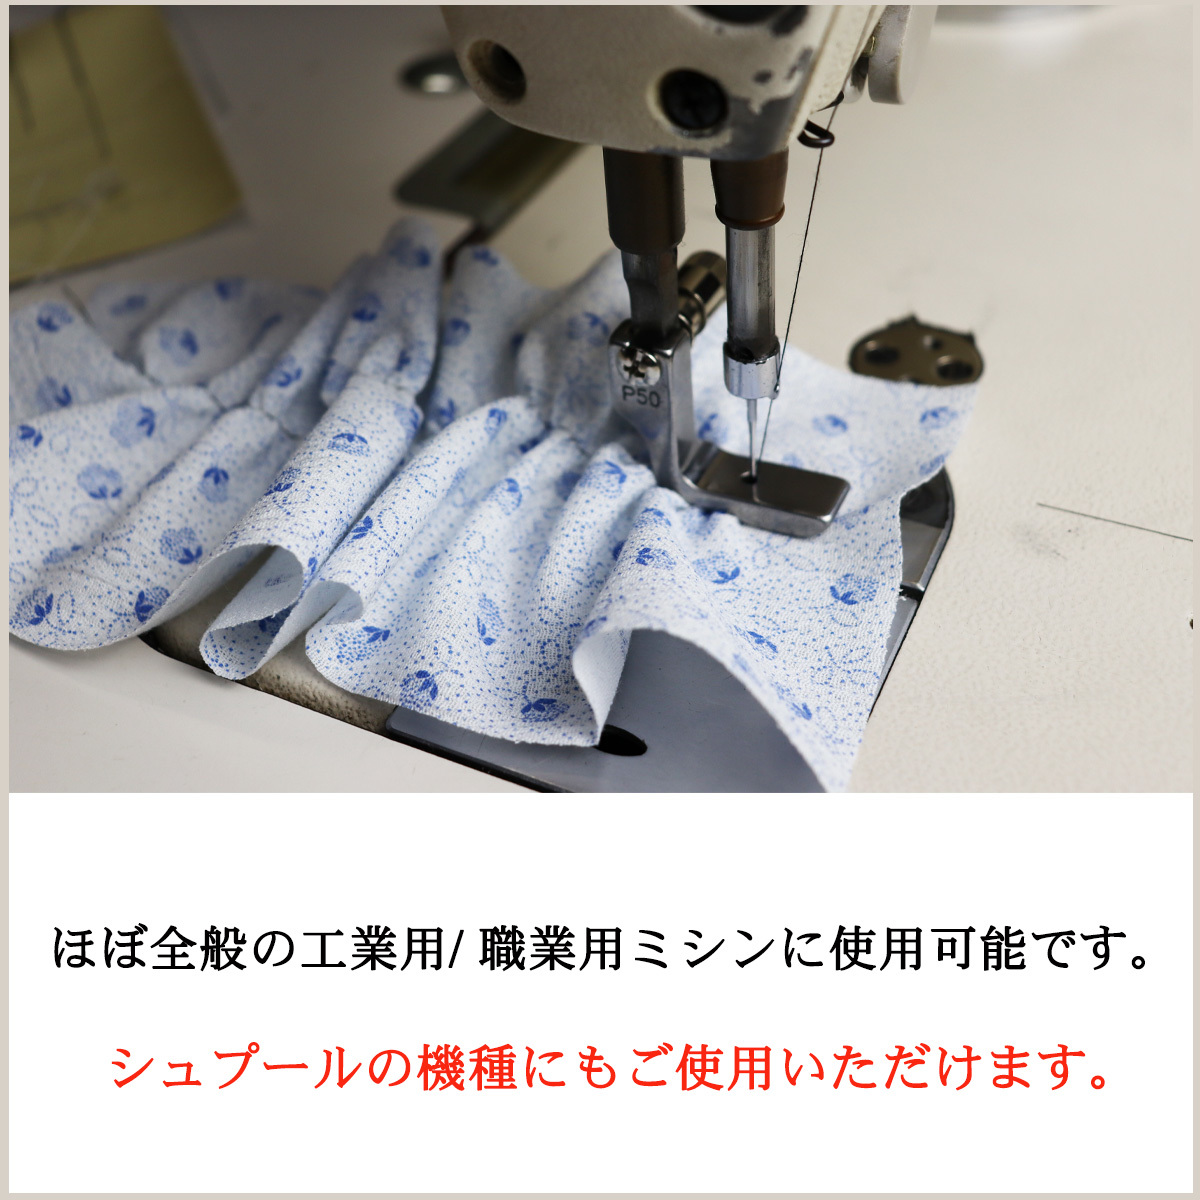  sewing machine pushed ..gya The - taking . car - ring industry for sewing machine occupation for sewing machine Juki sewing machine supplies parts parts Attachment accessory parts 